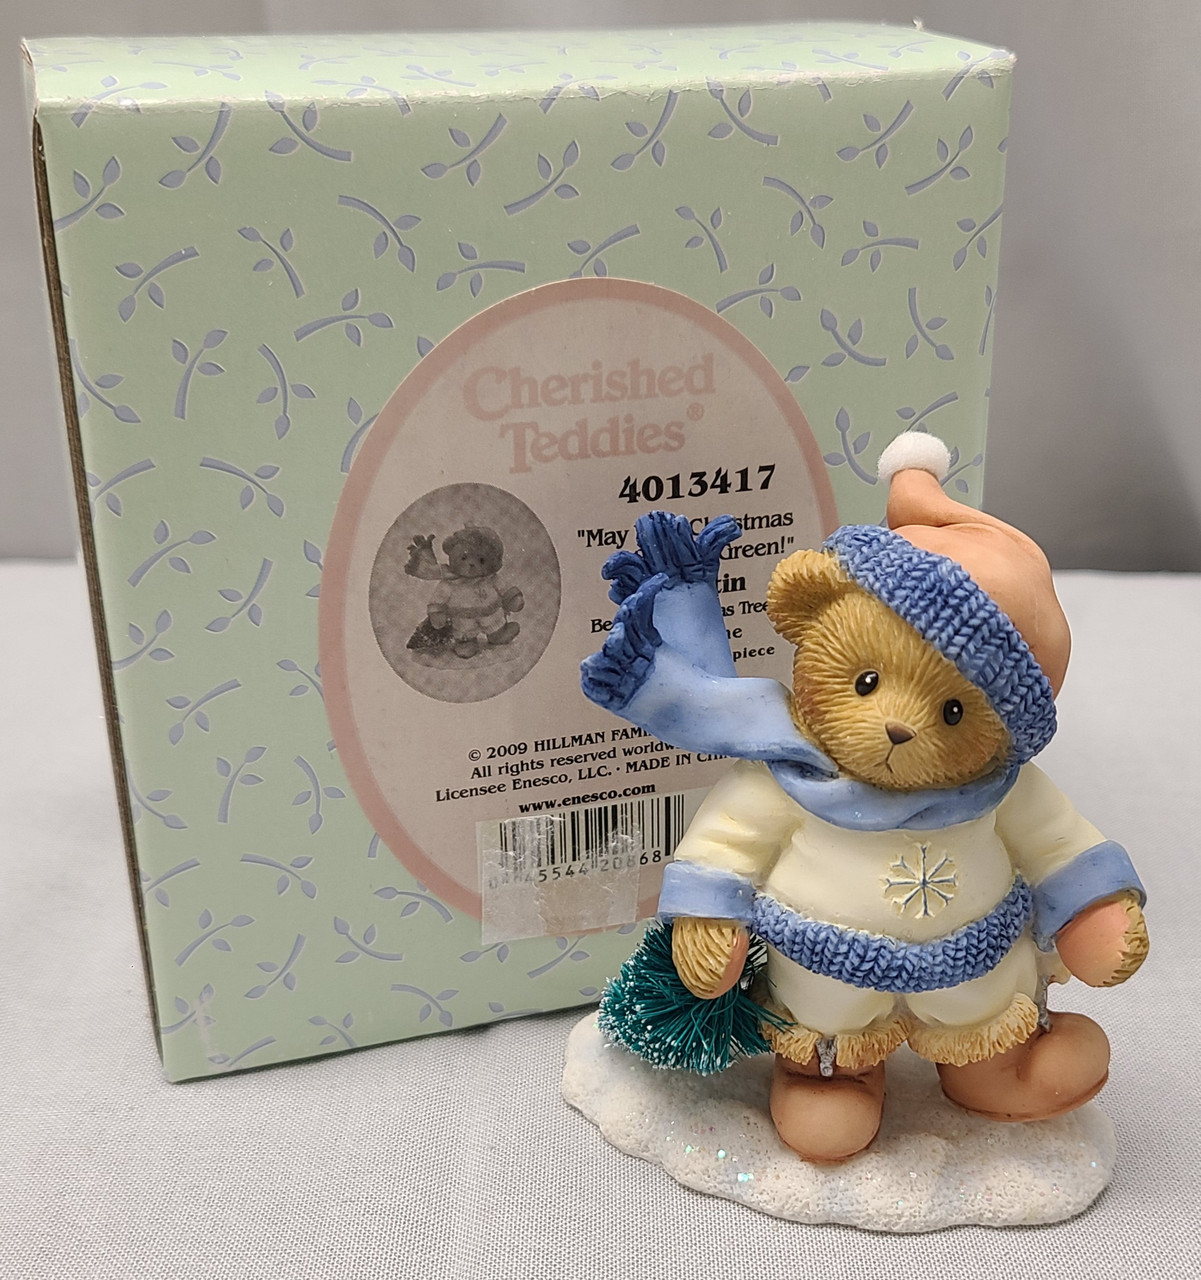 Cherished Teddies DUSTIN "May Your Christmas Be Ever-Green" 4013417